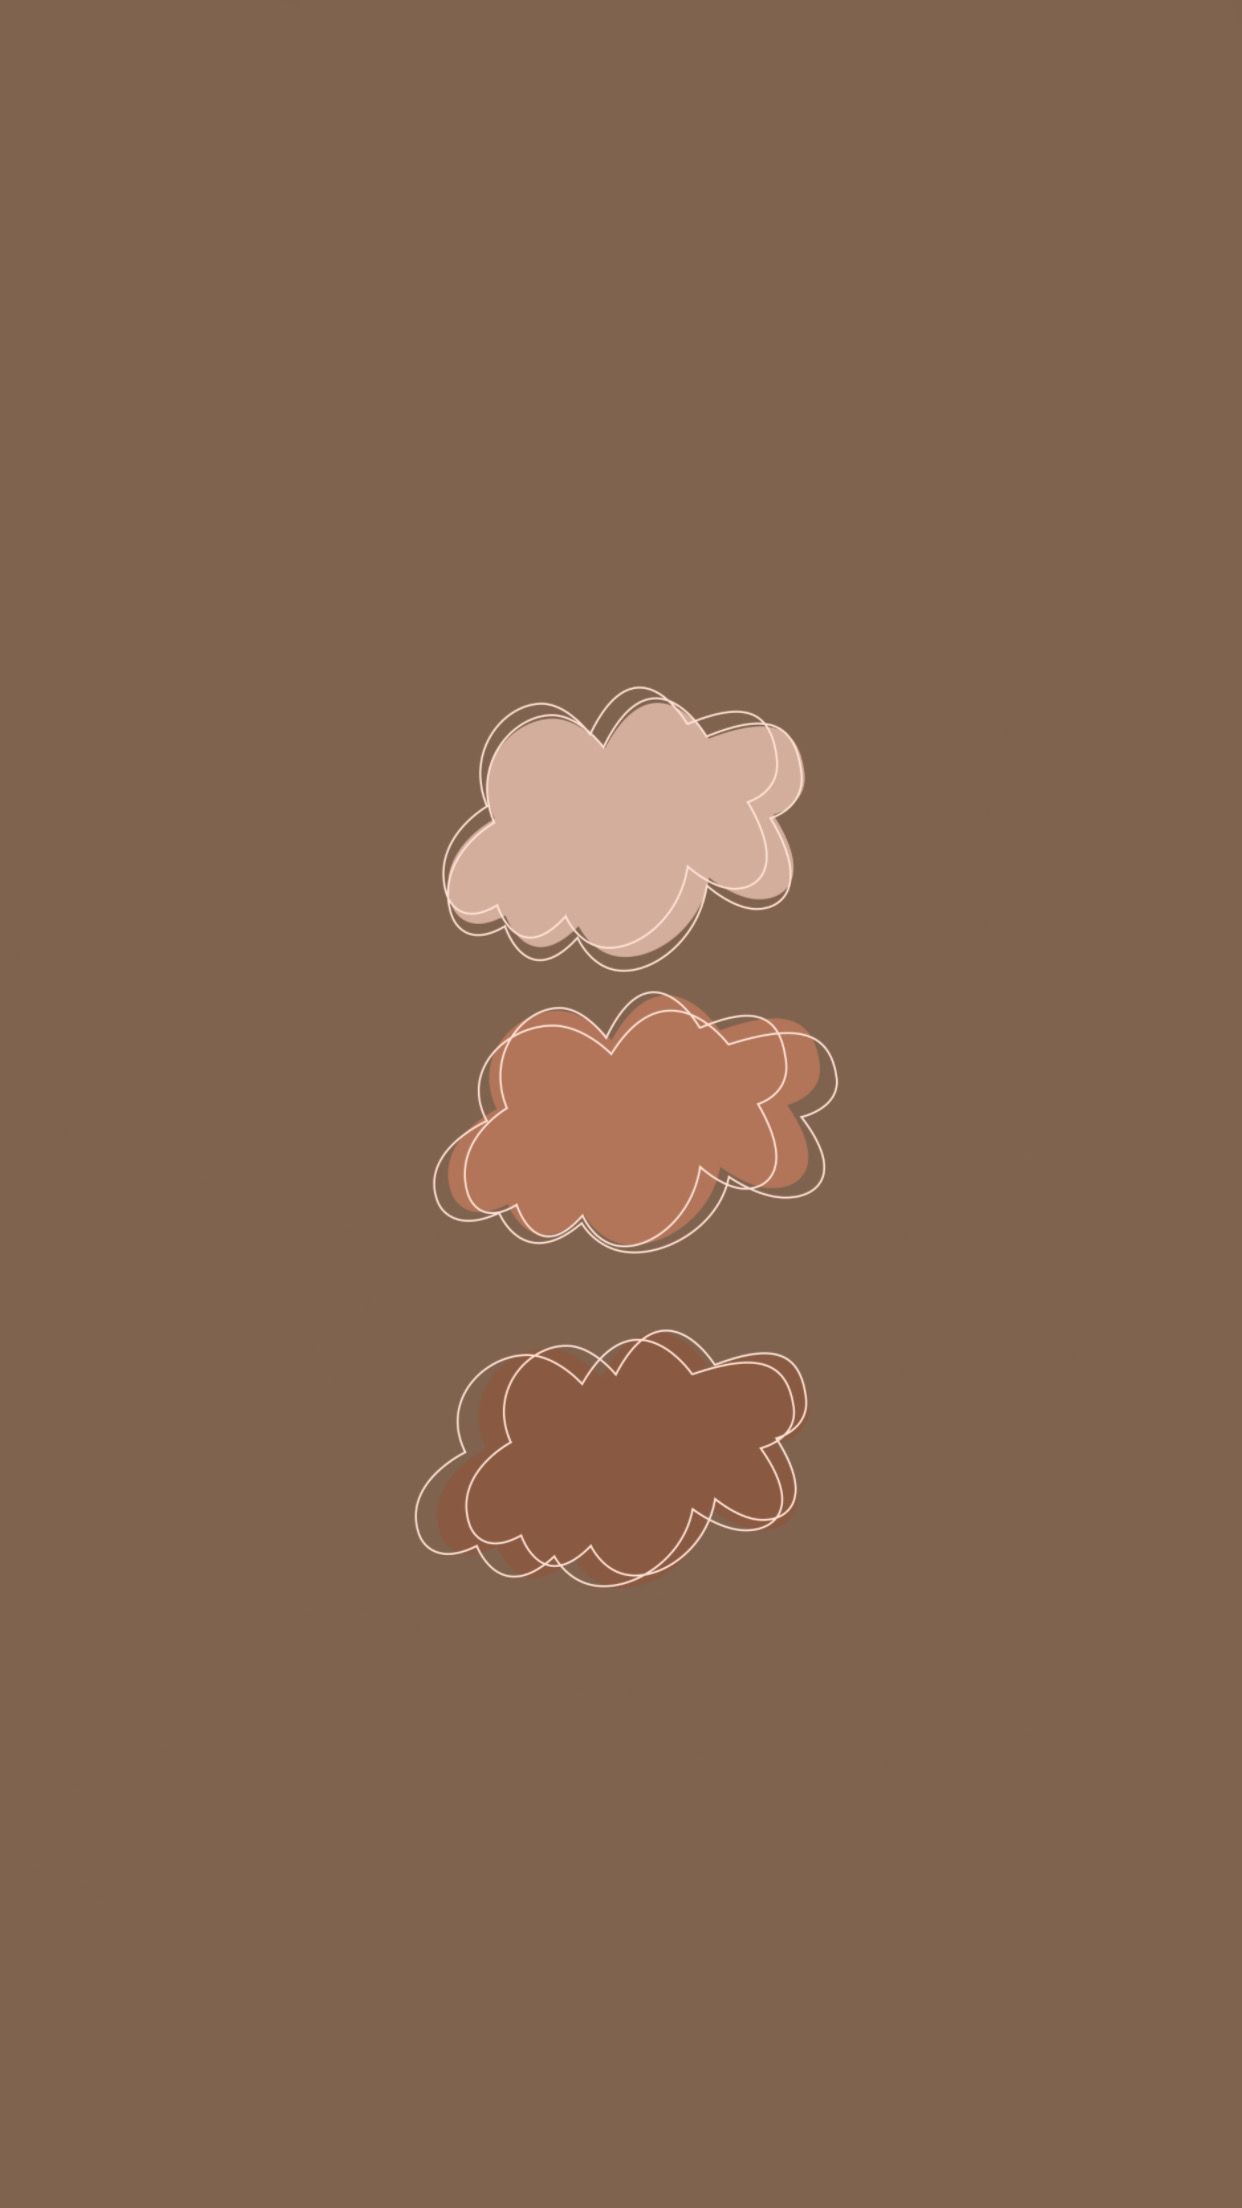 Aggregate 70+ minimalist brown aesthetic wallpaper - in.cdgdbentre